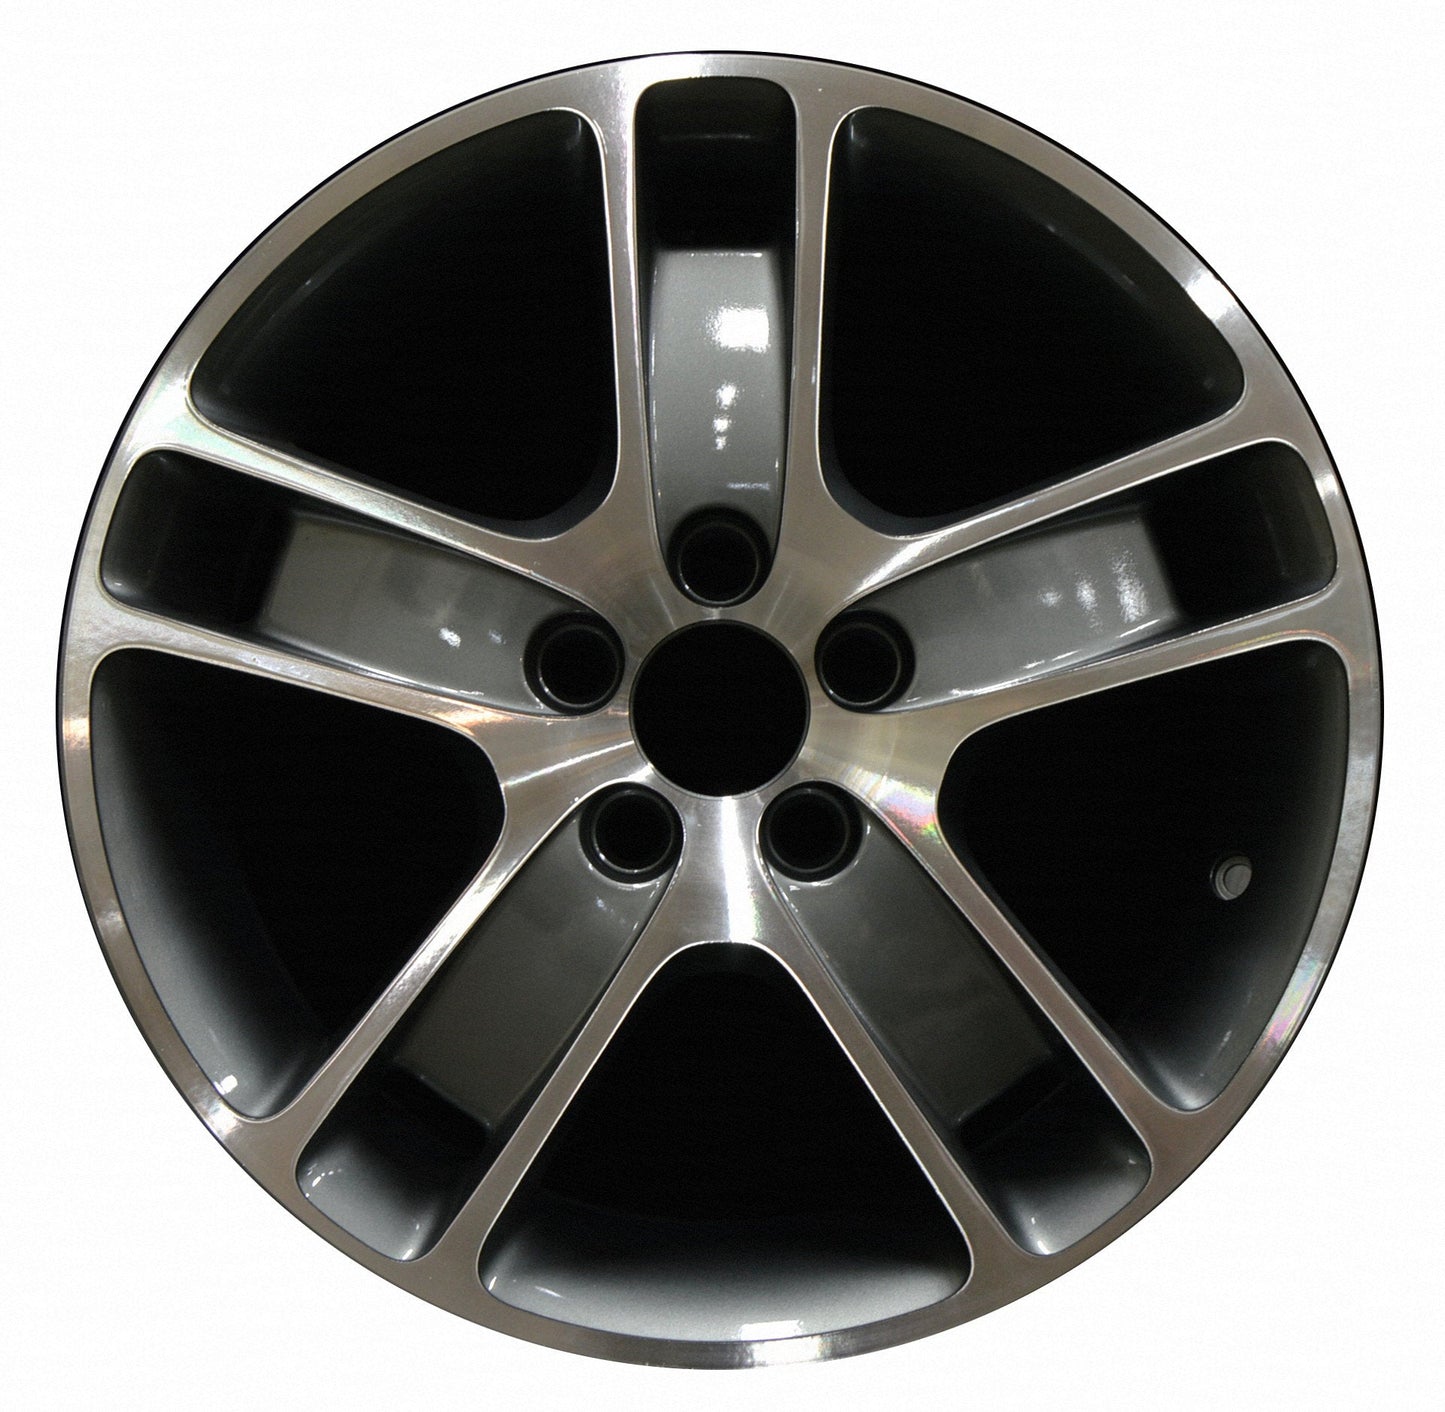 Volvo 50 Series  2007, 2008, 2009, 2010 Factory OEM Car Wheel Size 17x7 Alloy WAO.70302.LC33.MA